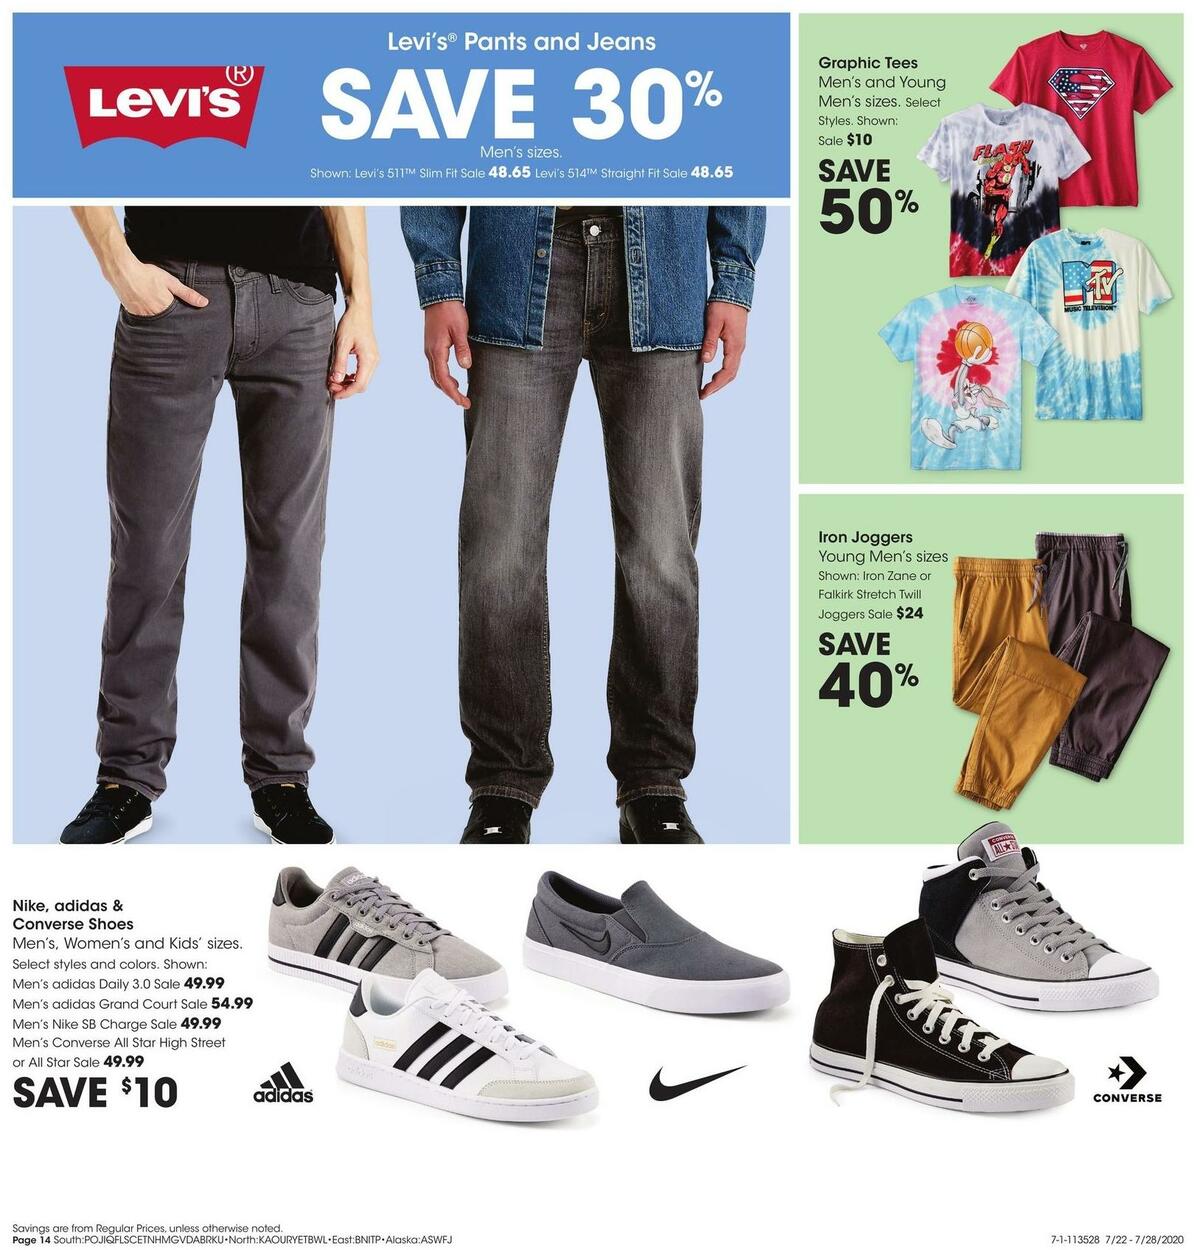 Fred Meyer General Merchandise Weekly Ad from July 22